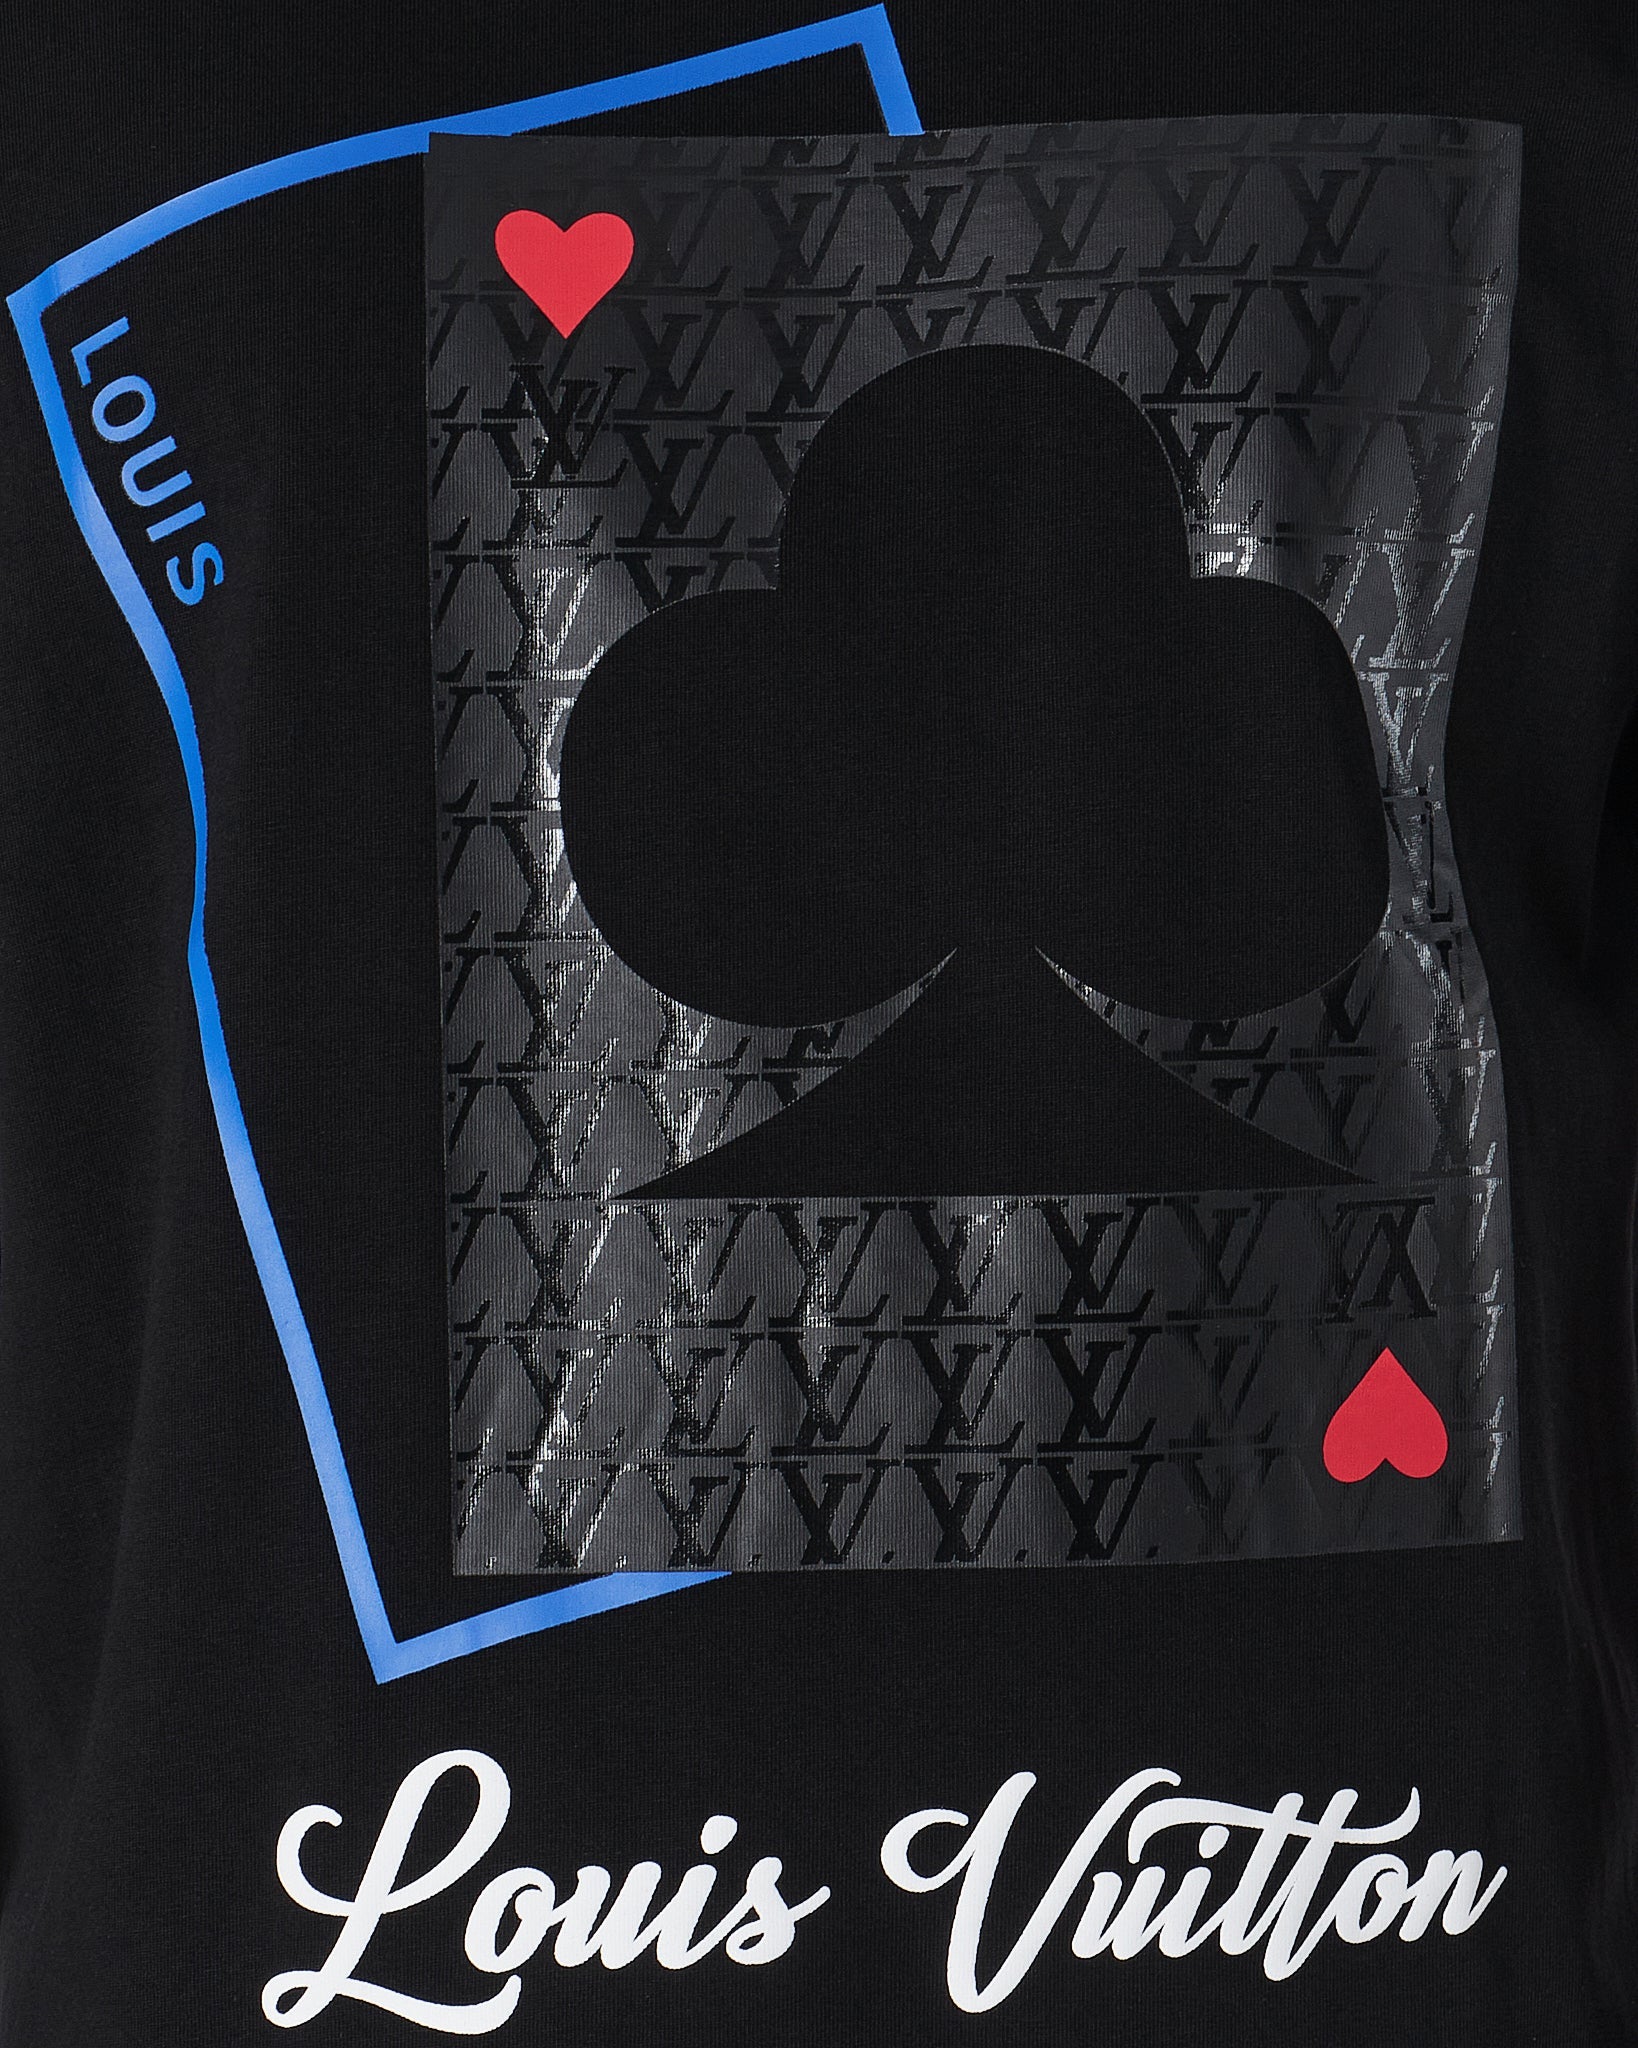 MOI OUTFIT-Playing Card Printed Men T-Shirt 48.90